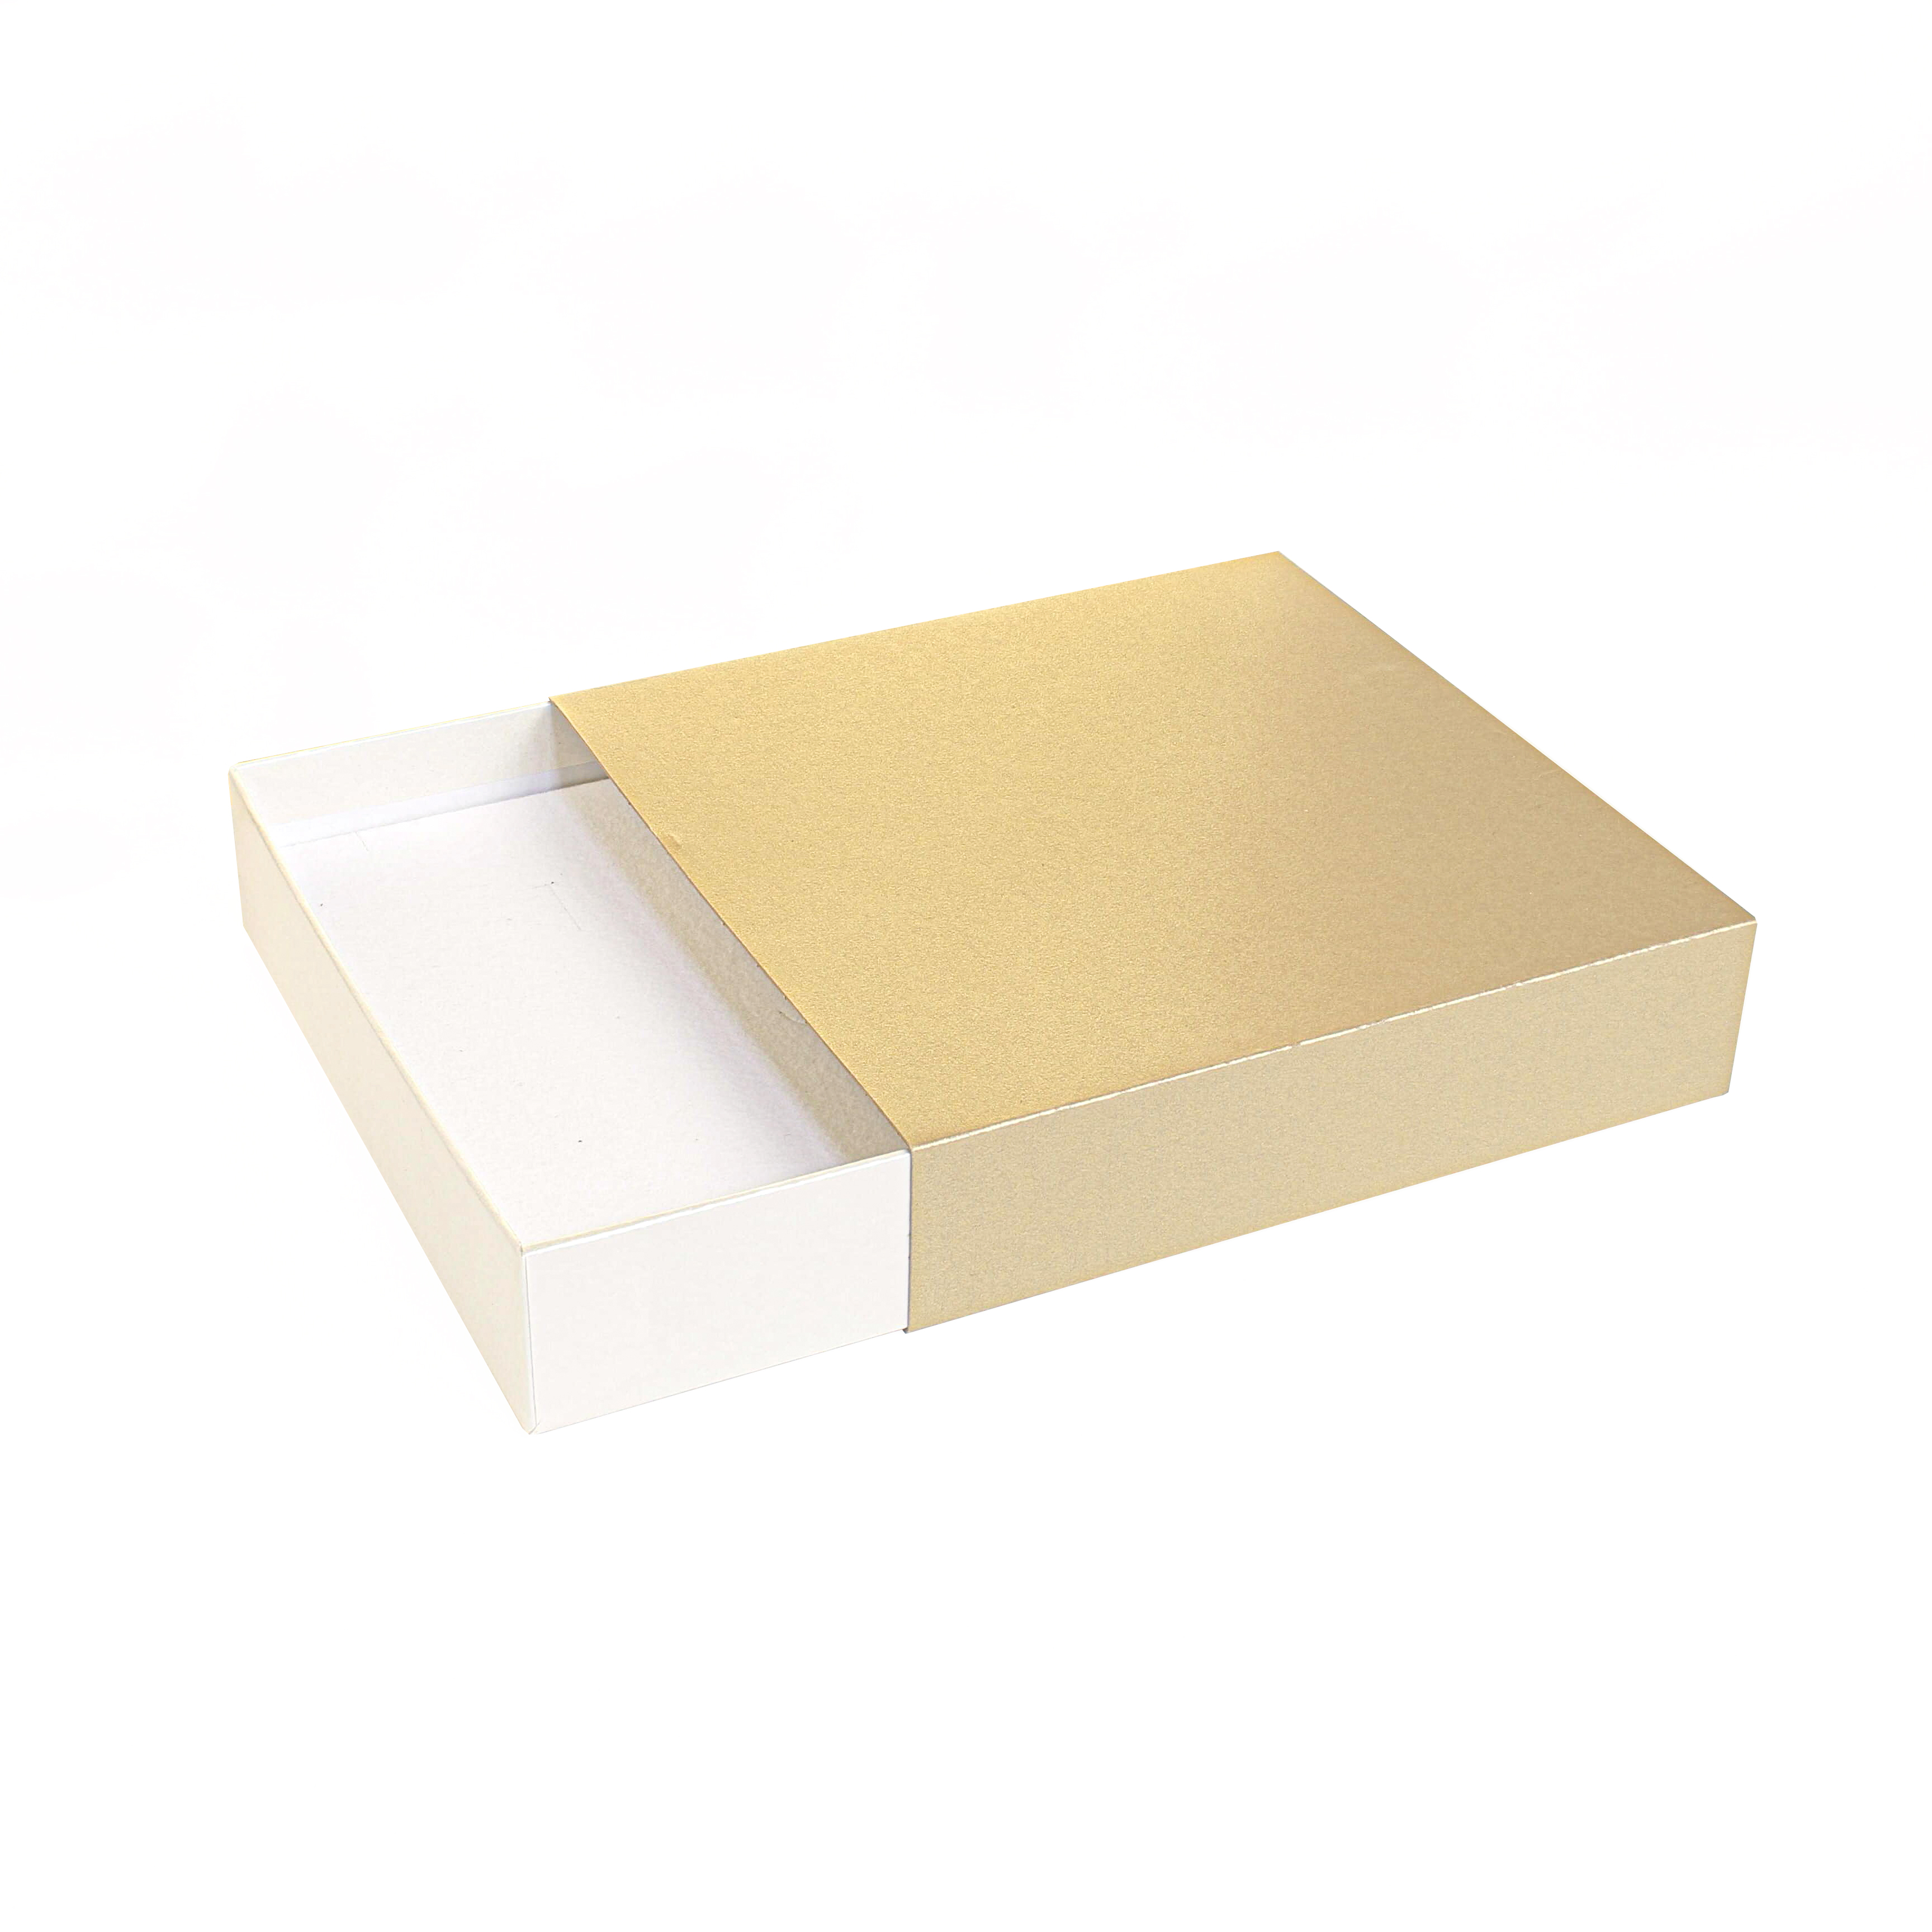 Iridescent gold and cream necklace box with drawer